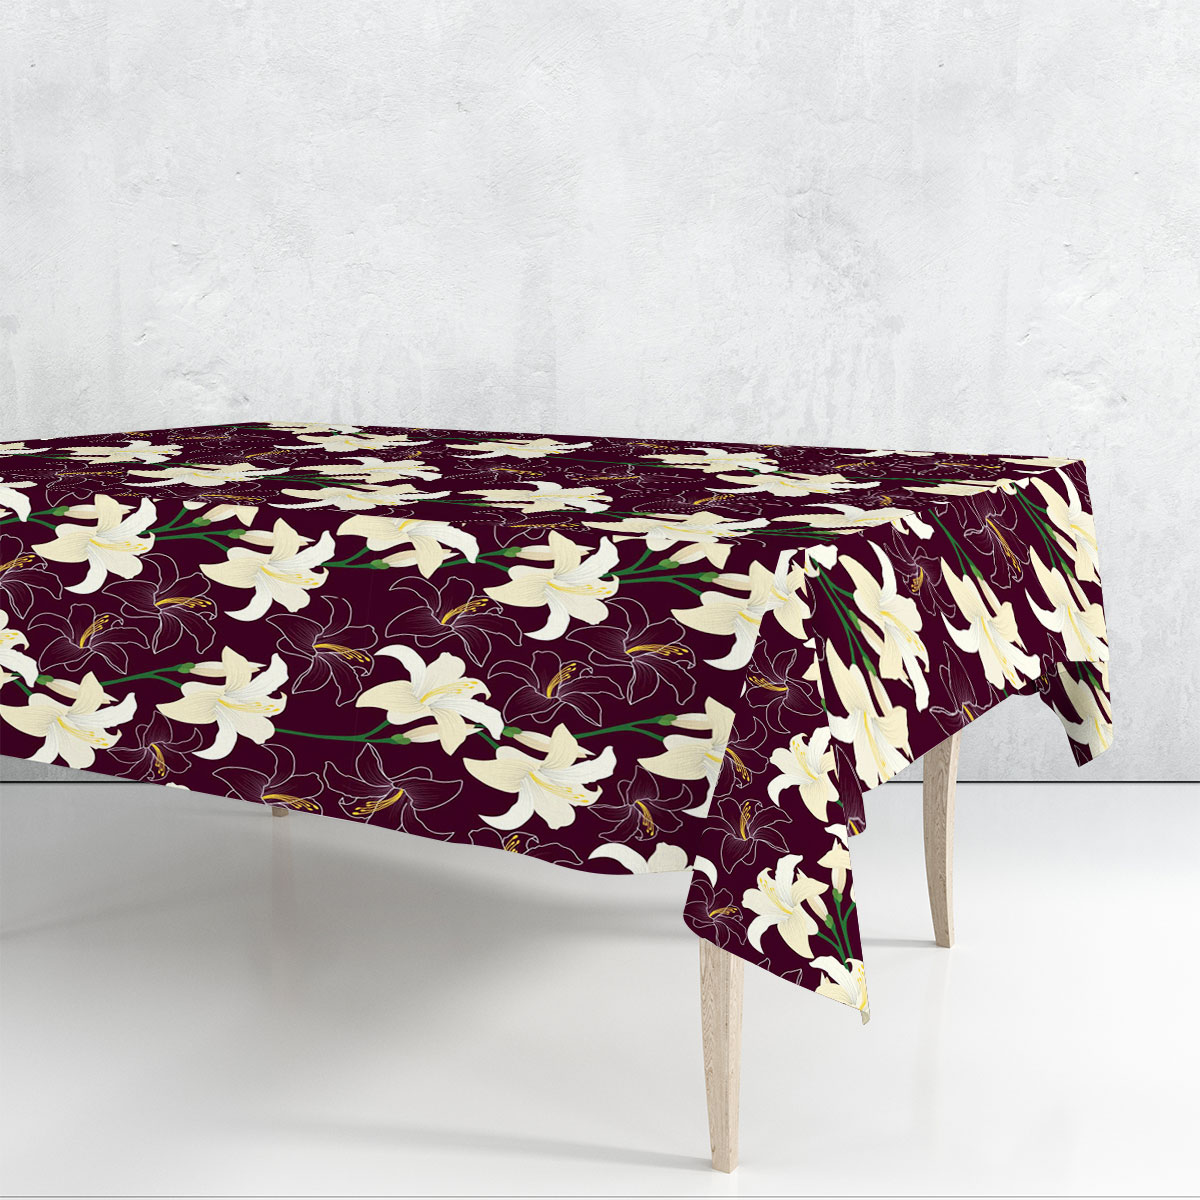 White Lily Seamless Pattern Rectangle Tablecloth